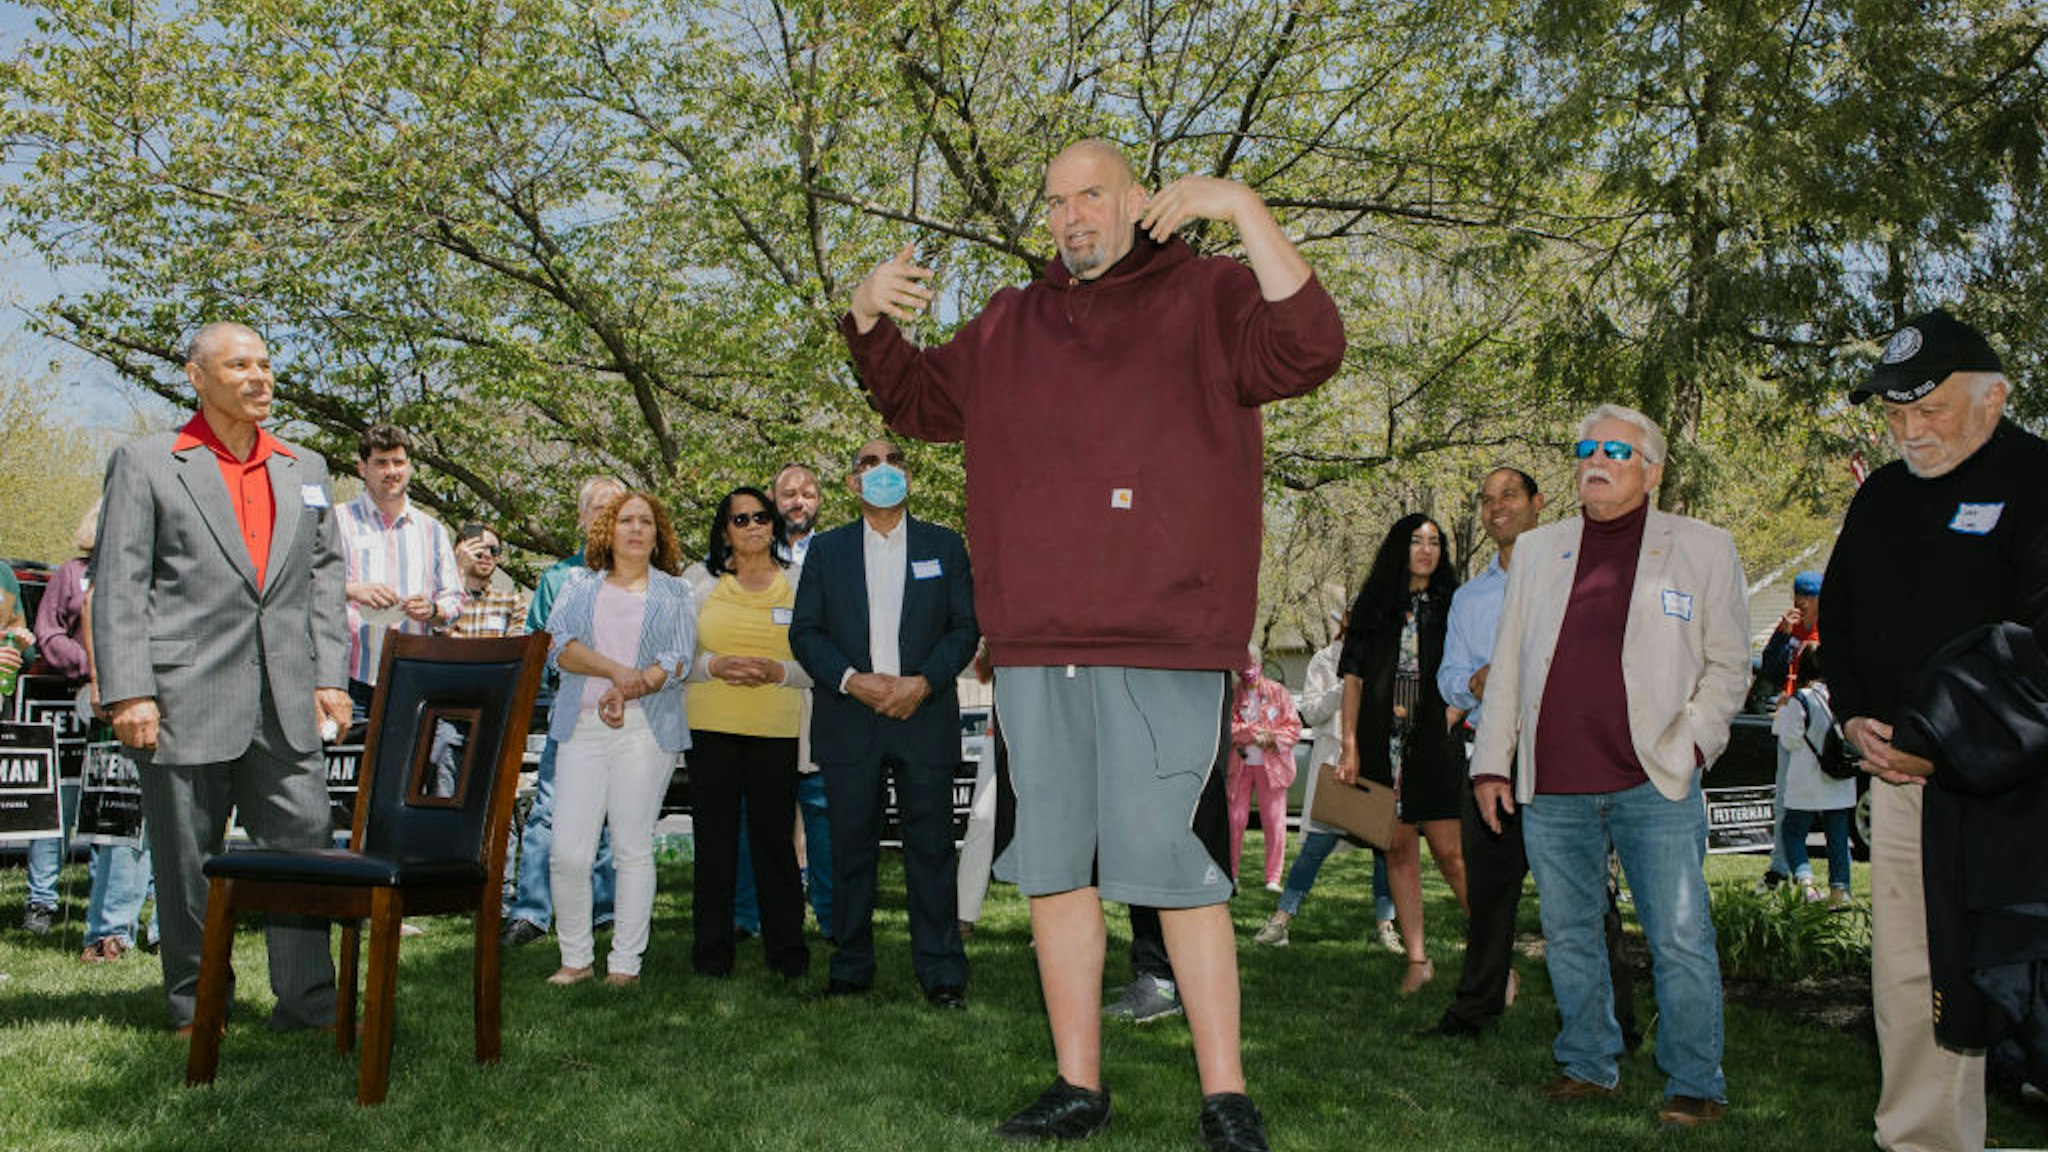 John Fetterman, lieutenant governor of Pennsylvania and Democratic senate candidate, center, speaks during a campaign event in Lebanon, Pennsylvania, U.S., on Saturday, April 30, 2022. Fetterman, the only candidate who has run statewide, leads the Democratic field with 33% in an Emerson College poll last month. Photographer: